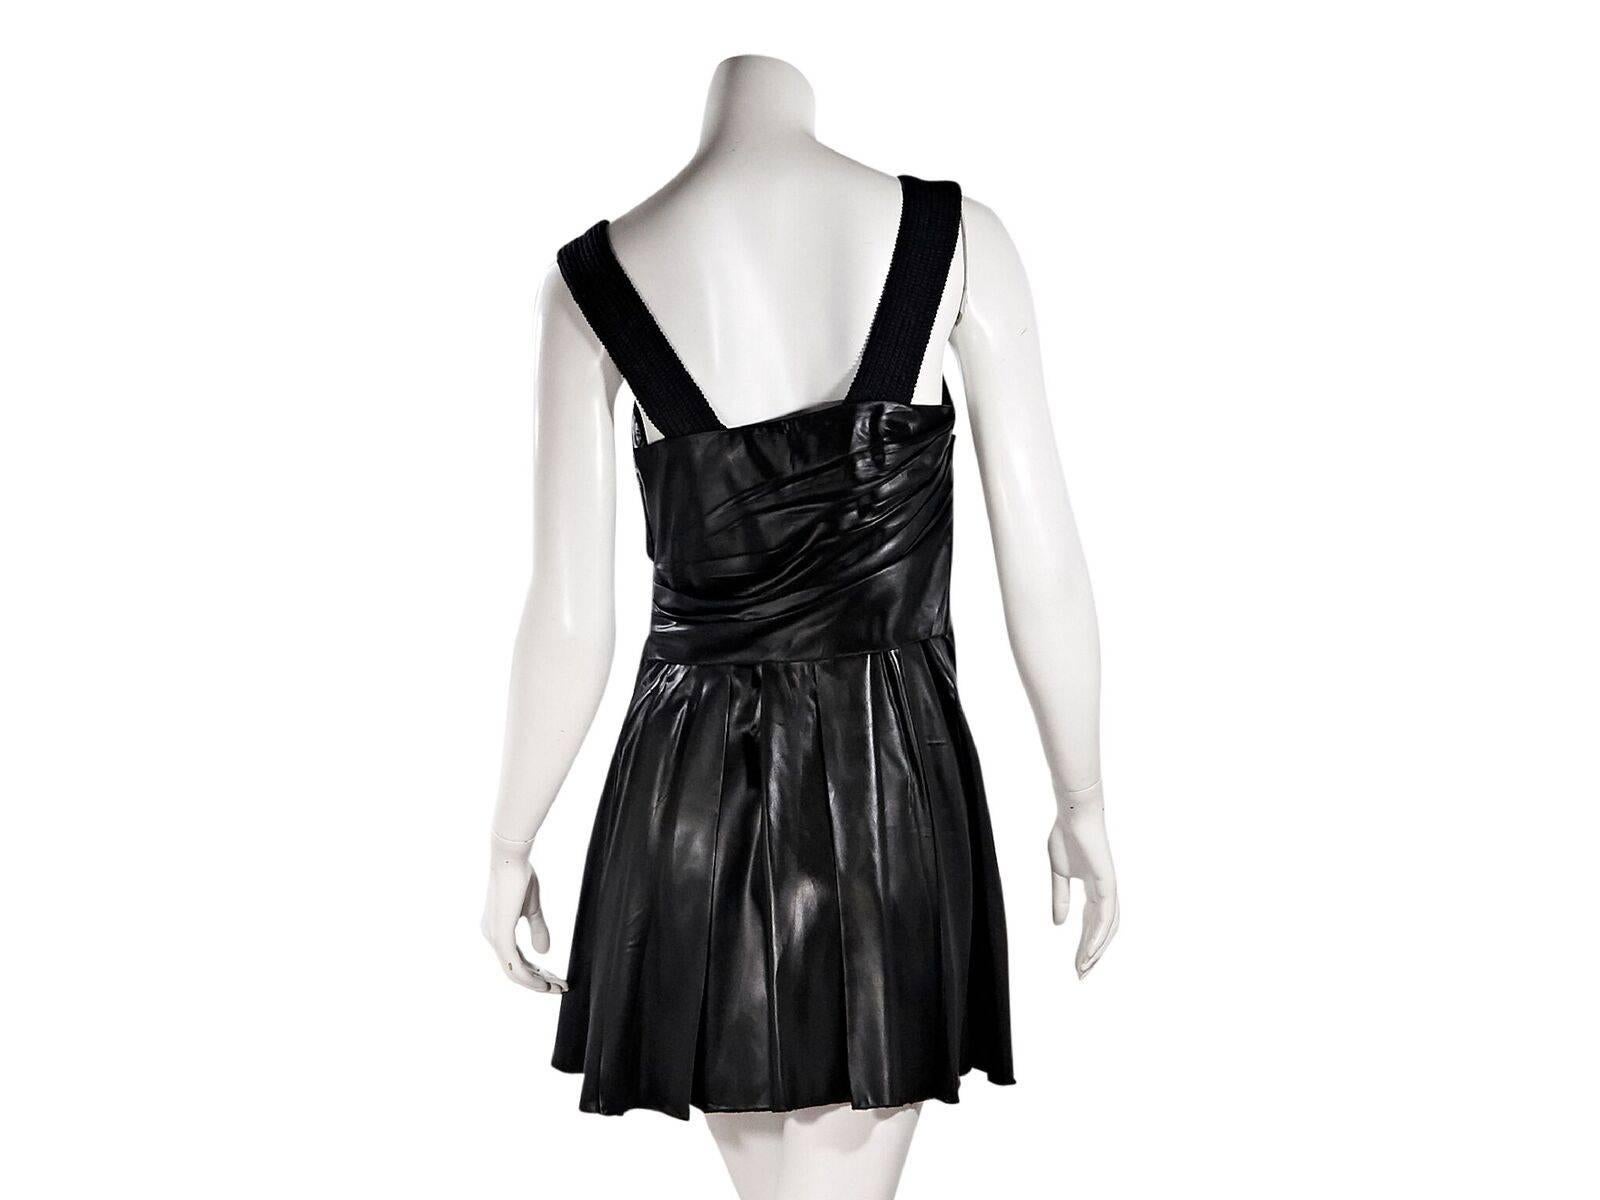 Product details:  Black pleated mini dress by Prada.  Squareneck.  Sleeveless.  Concealed side zip closure.  Label size IT 46.  32